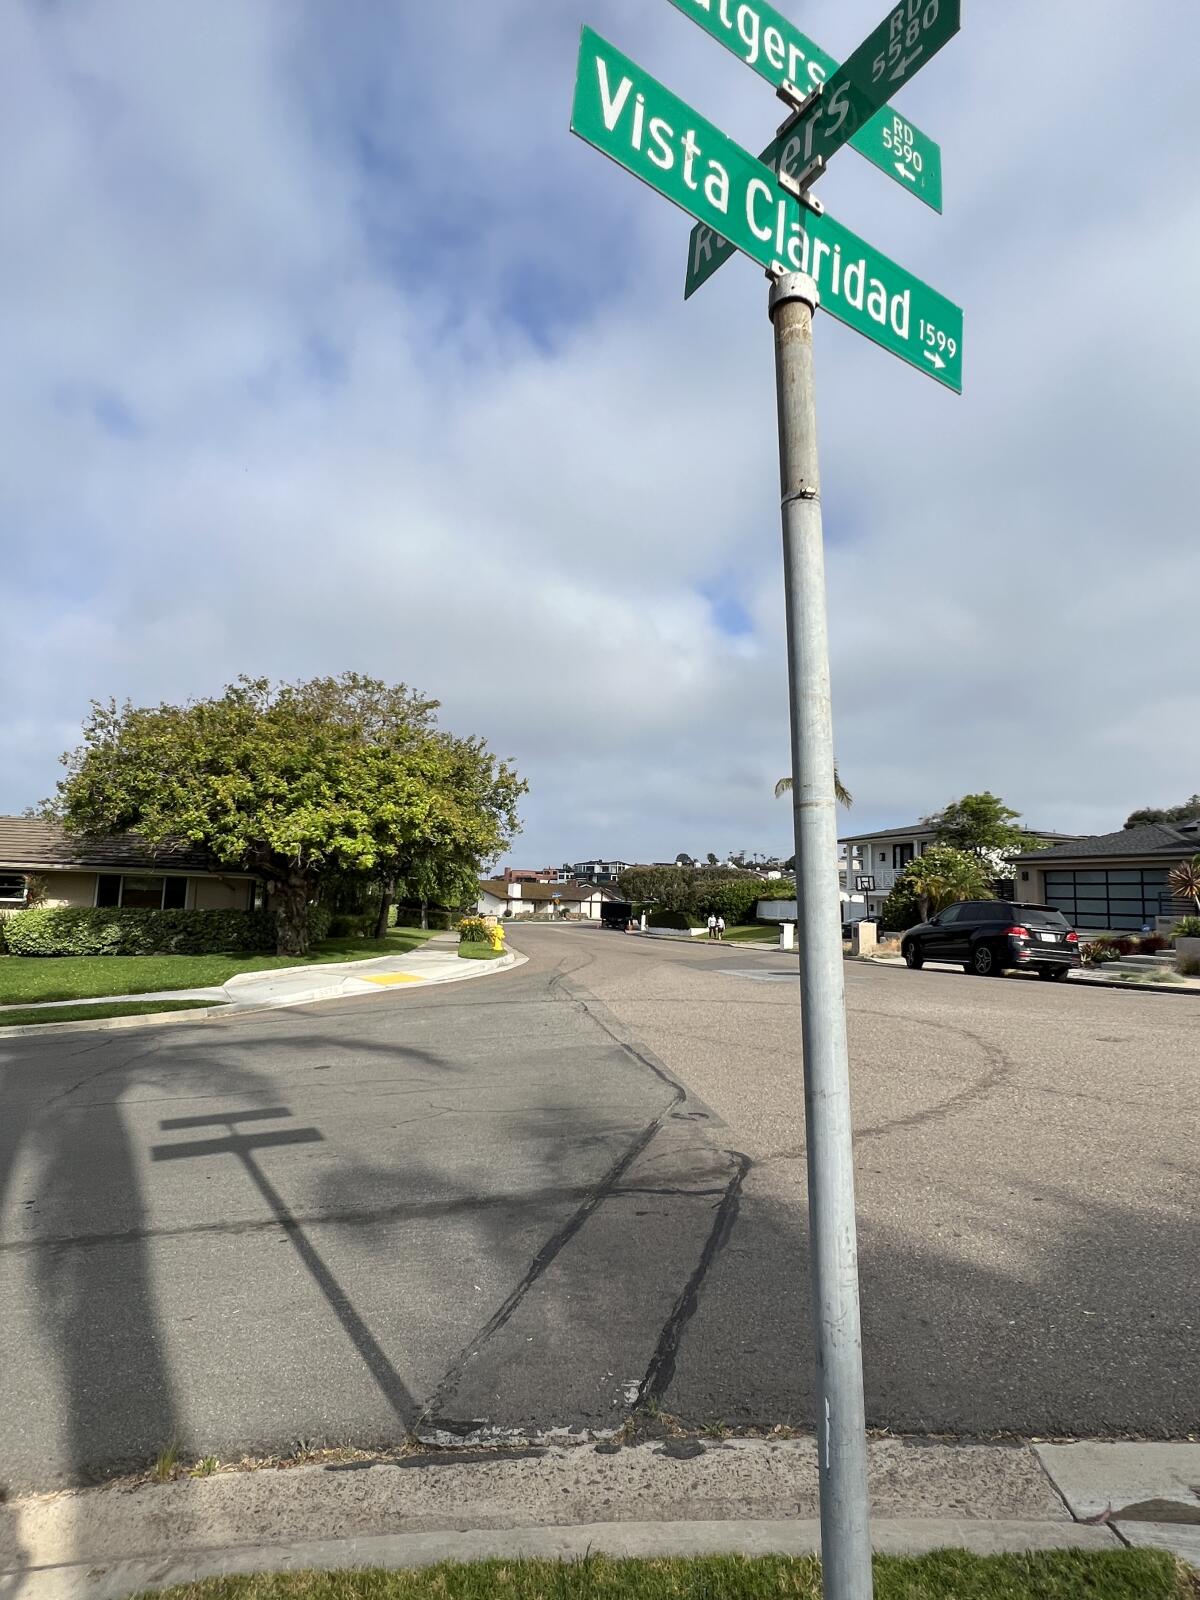 The city of San Diego has proposed a stop sign for the corner of Rutgers Road and Vista Claridad in La Jolla.